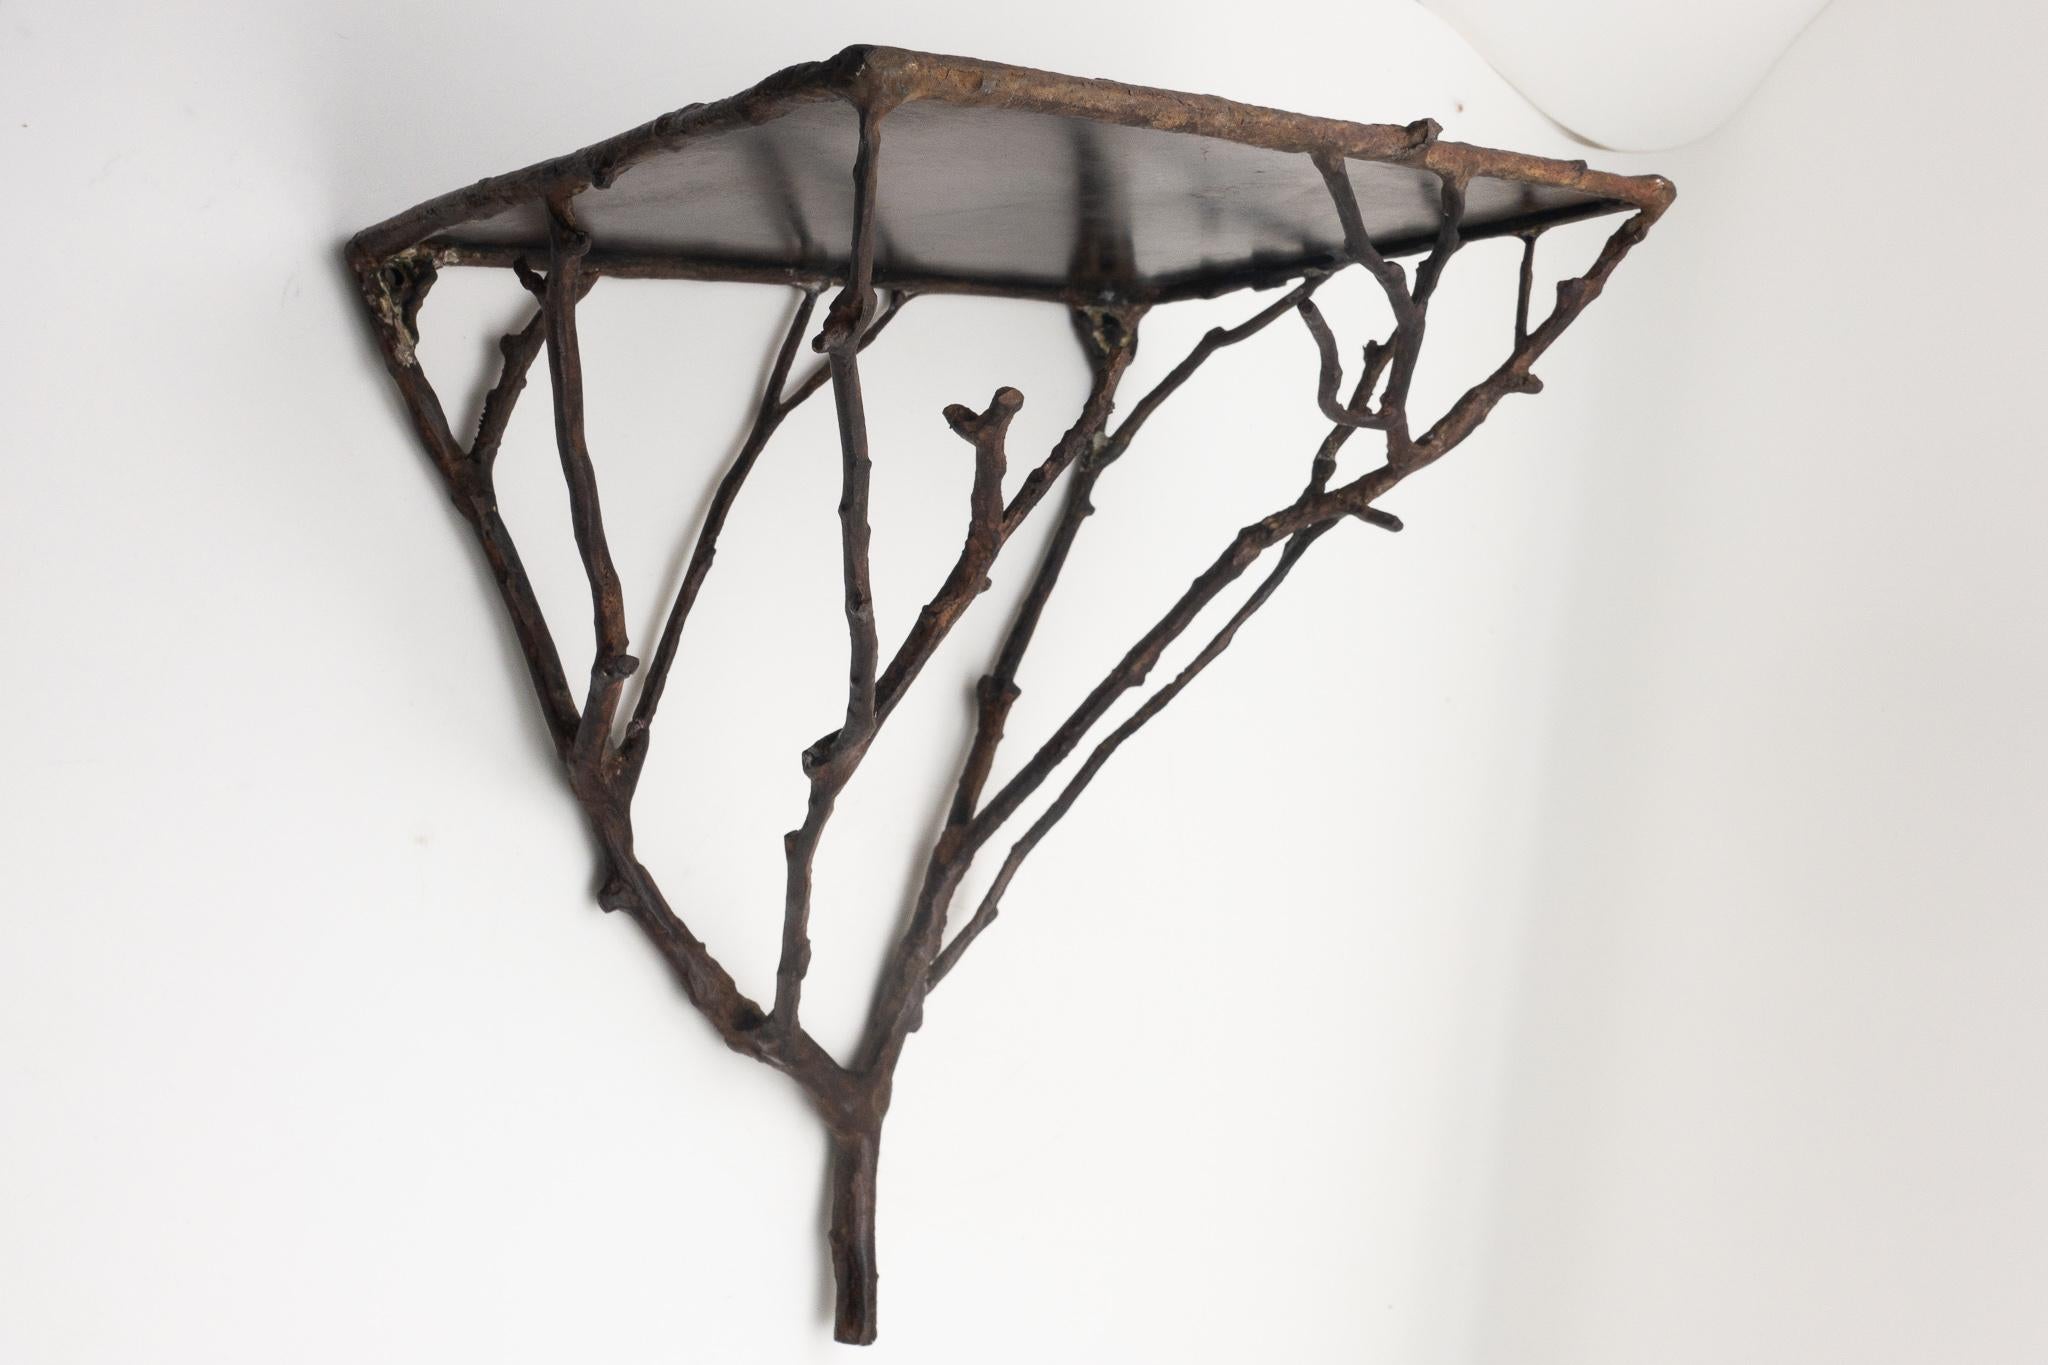 Organic and natural in design, this realistic twig wall bracket is cast in brass with a bronze finish.